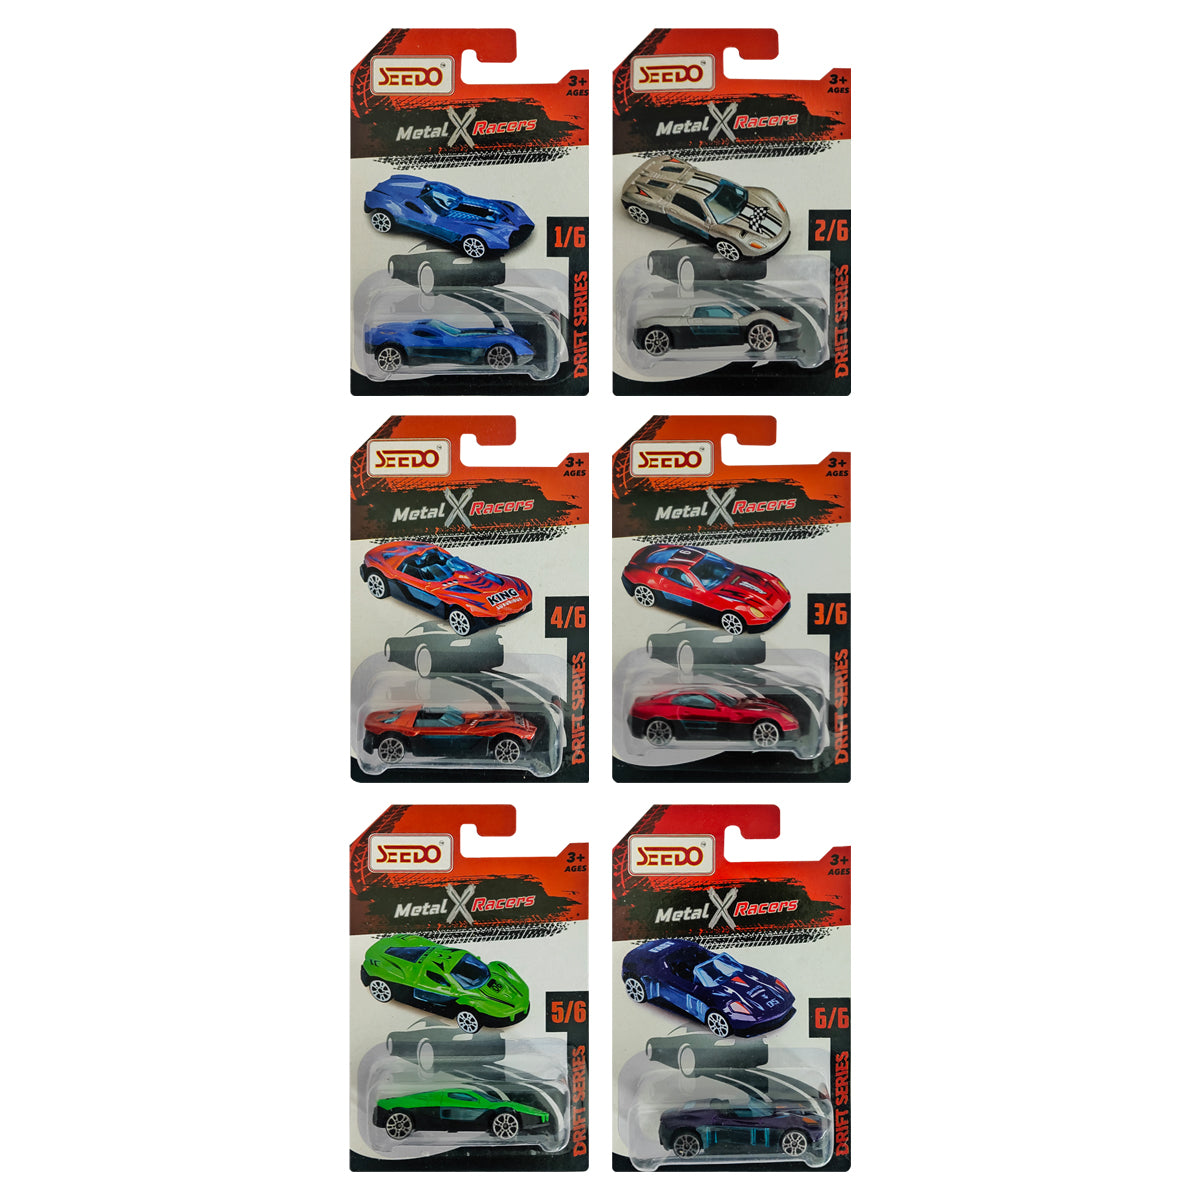 Seedo Metal X Racers Drift Series Die Cast Car for Ages 3+, Pack Of 6